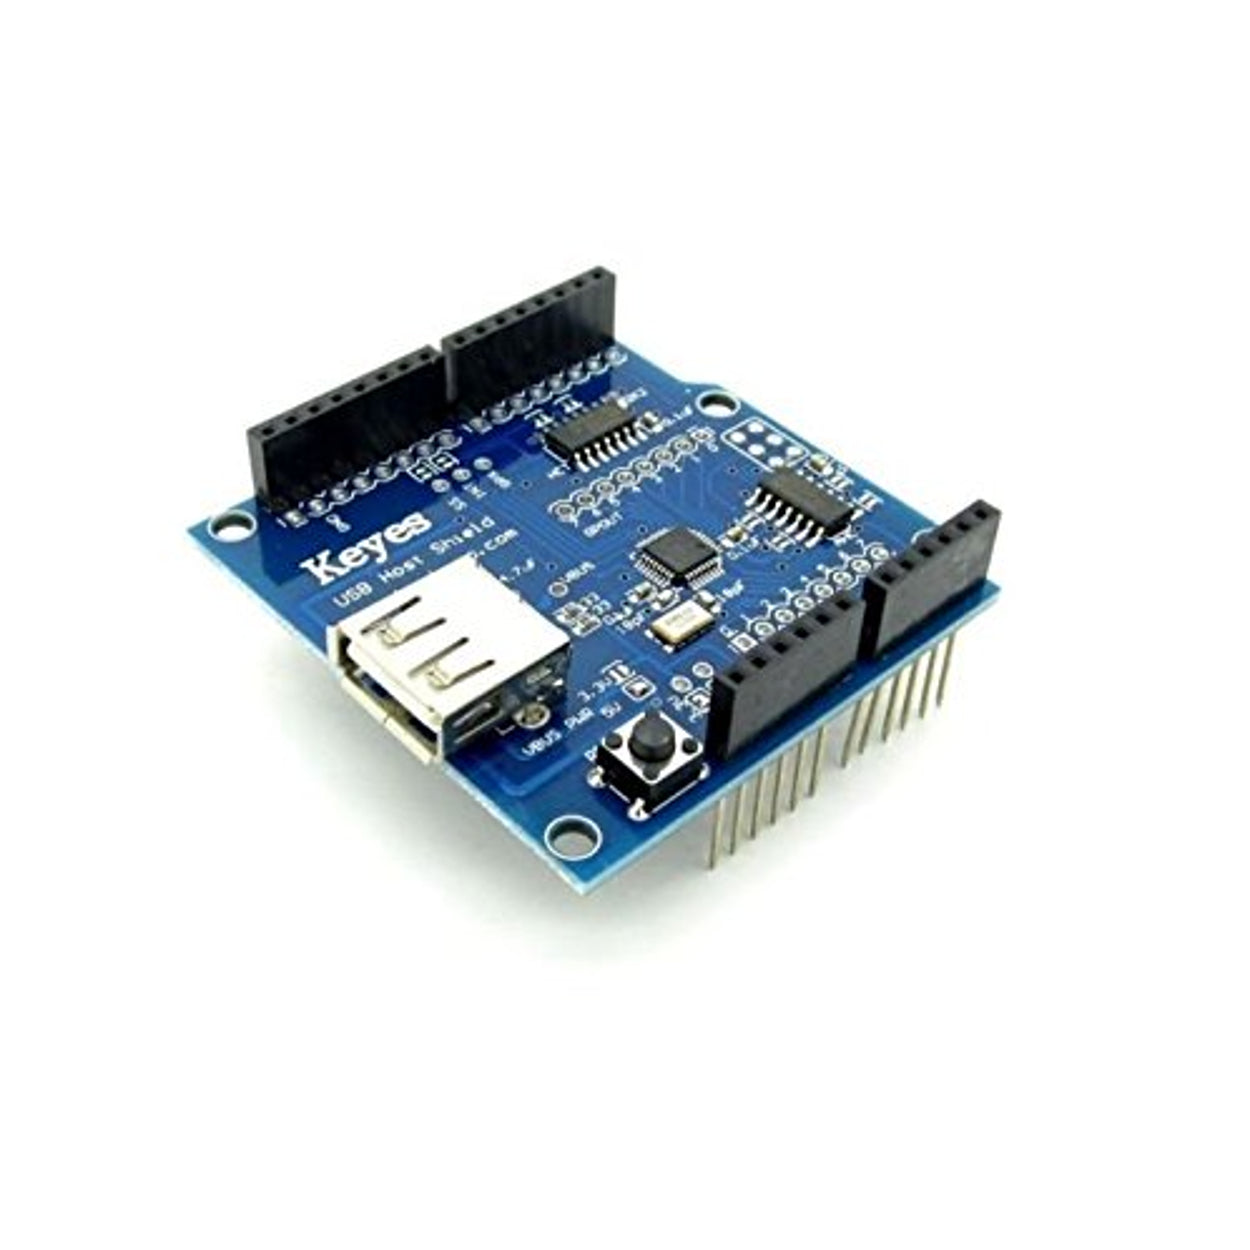 ADK USB Host Shield compatible with Arduino